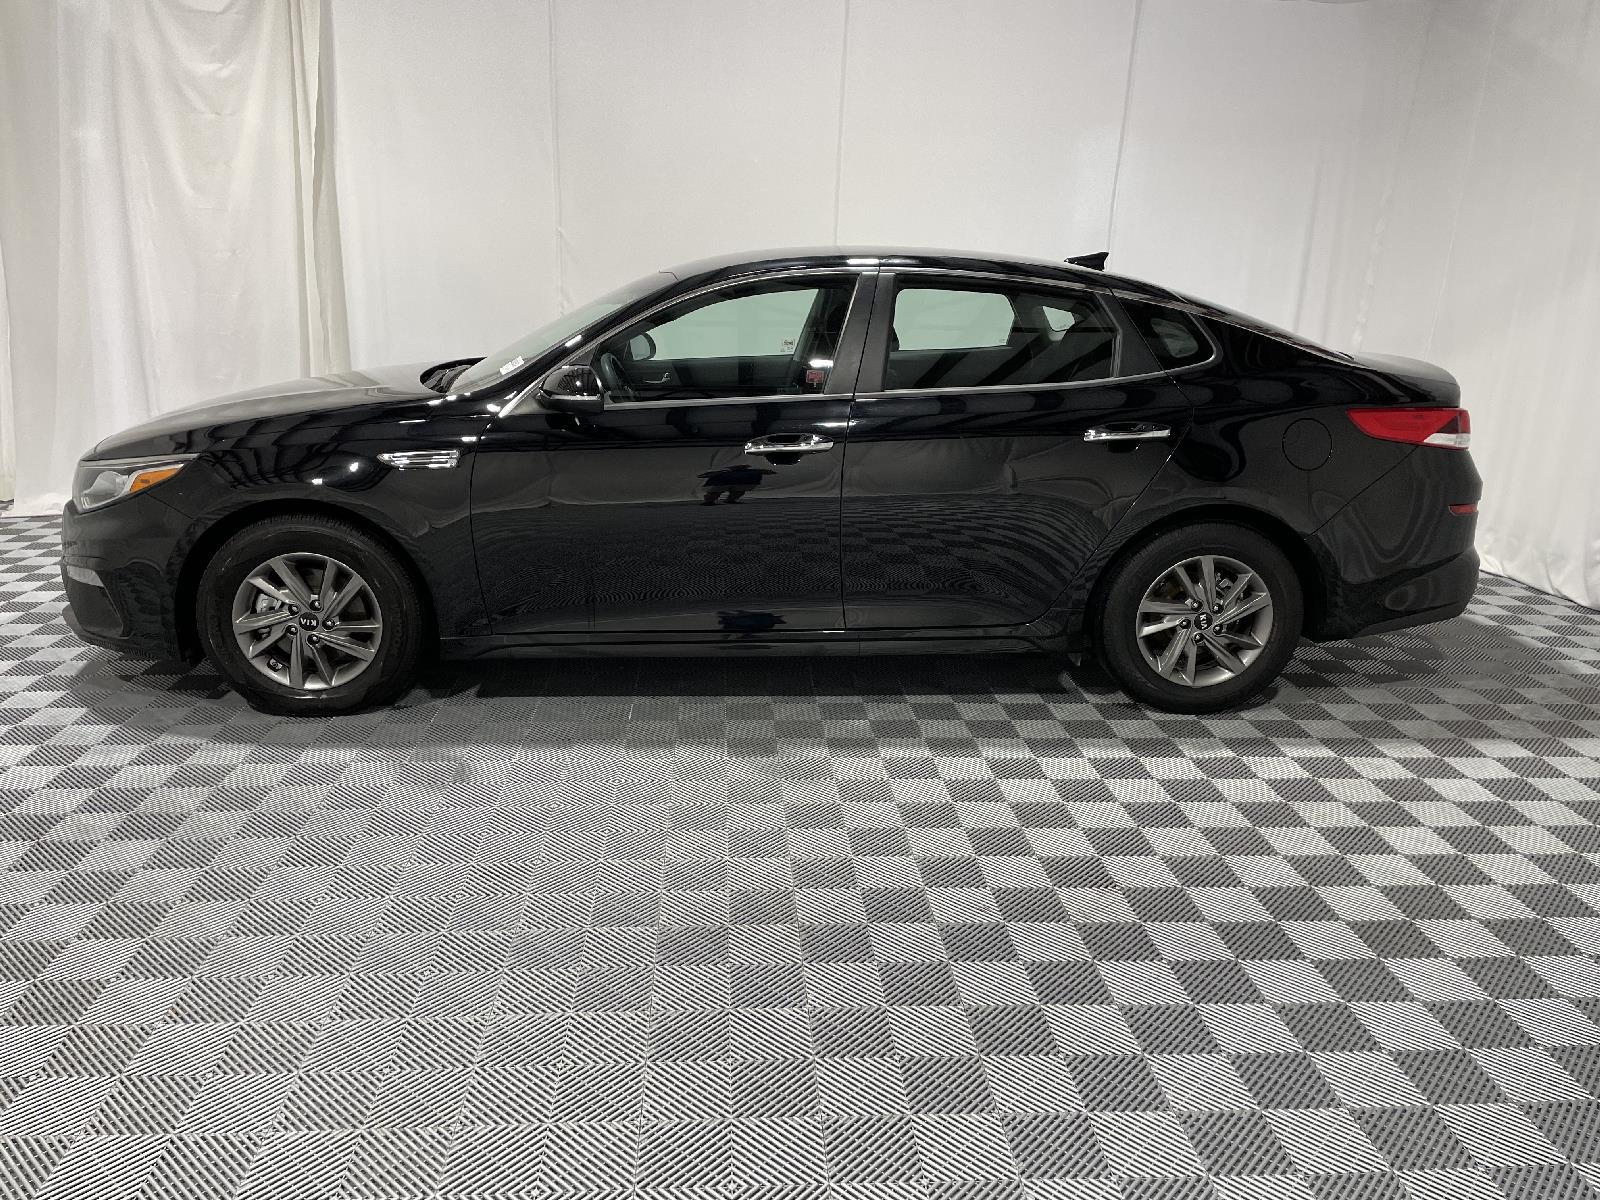 Used 2020 Kia Optima LX with VIN 5XXGT4L3XLG451121 for sale in Kansas City